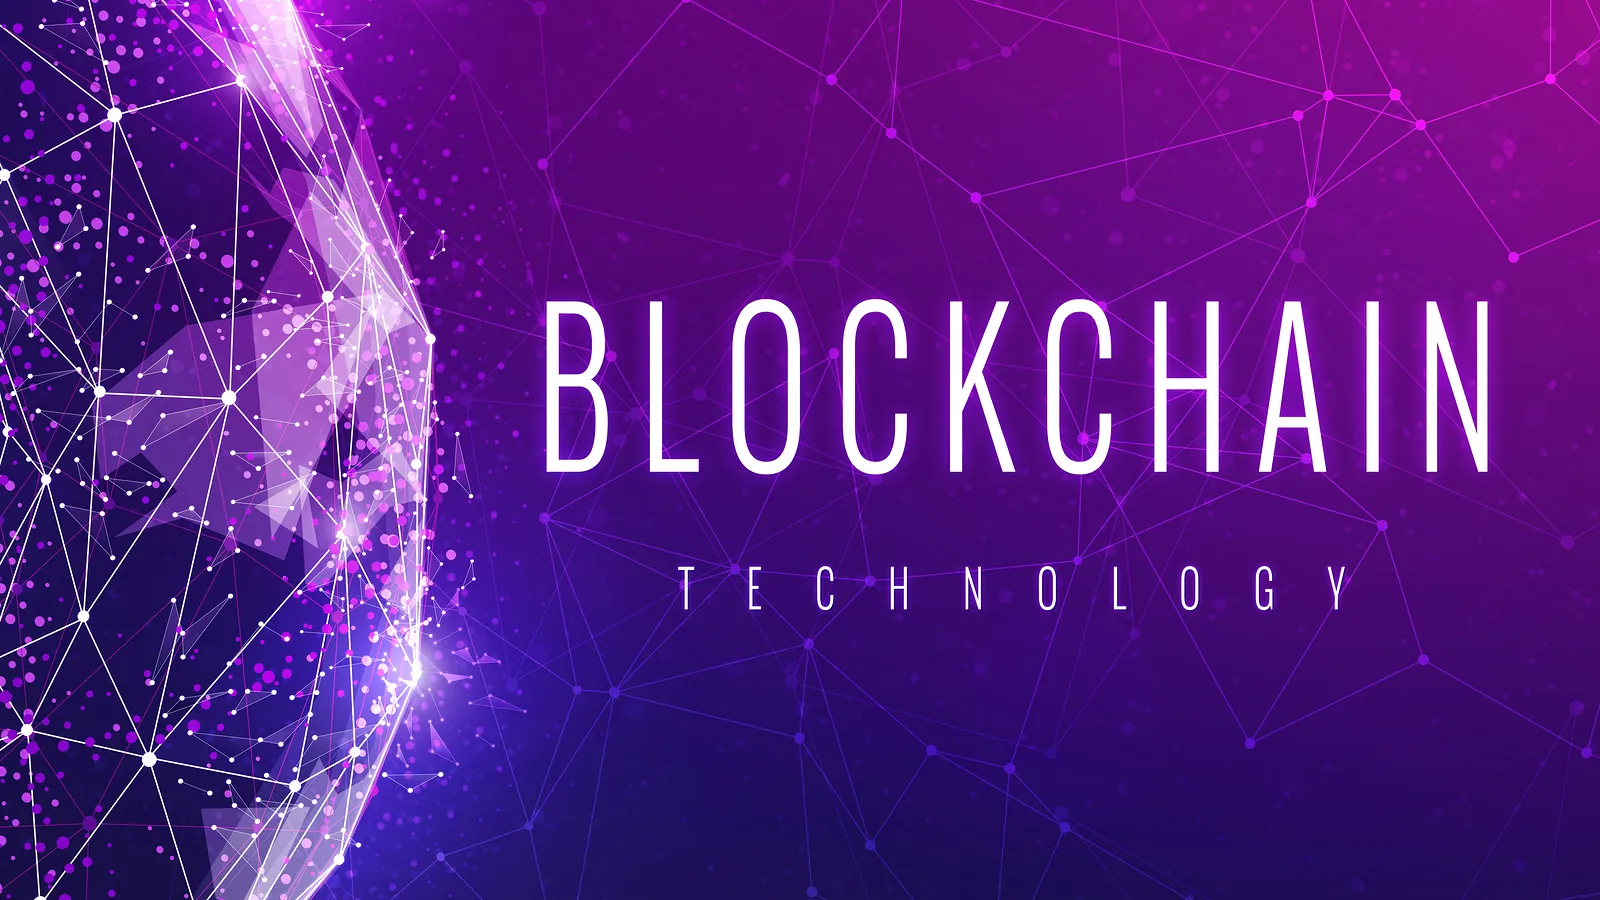 Potential blockchain applications to explore in 2022